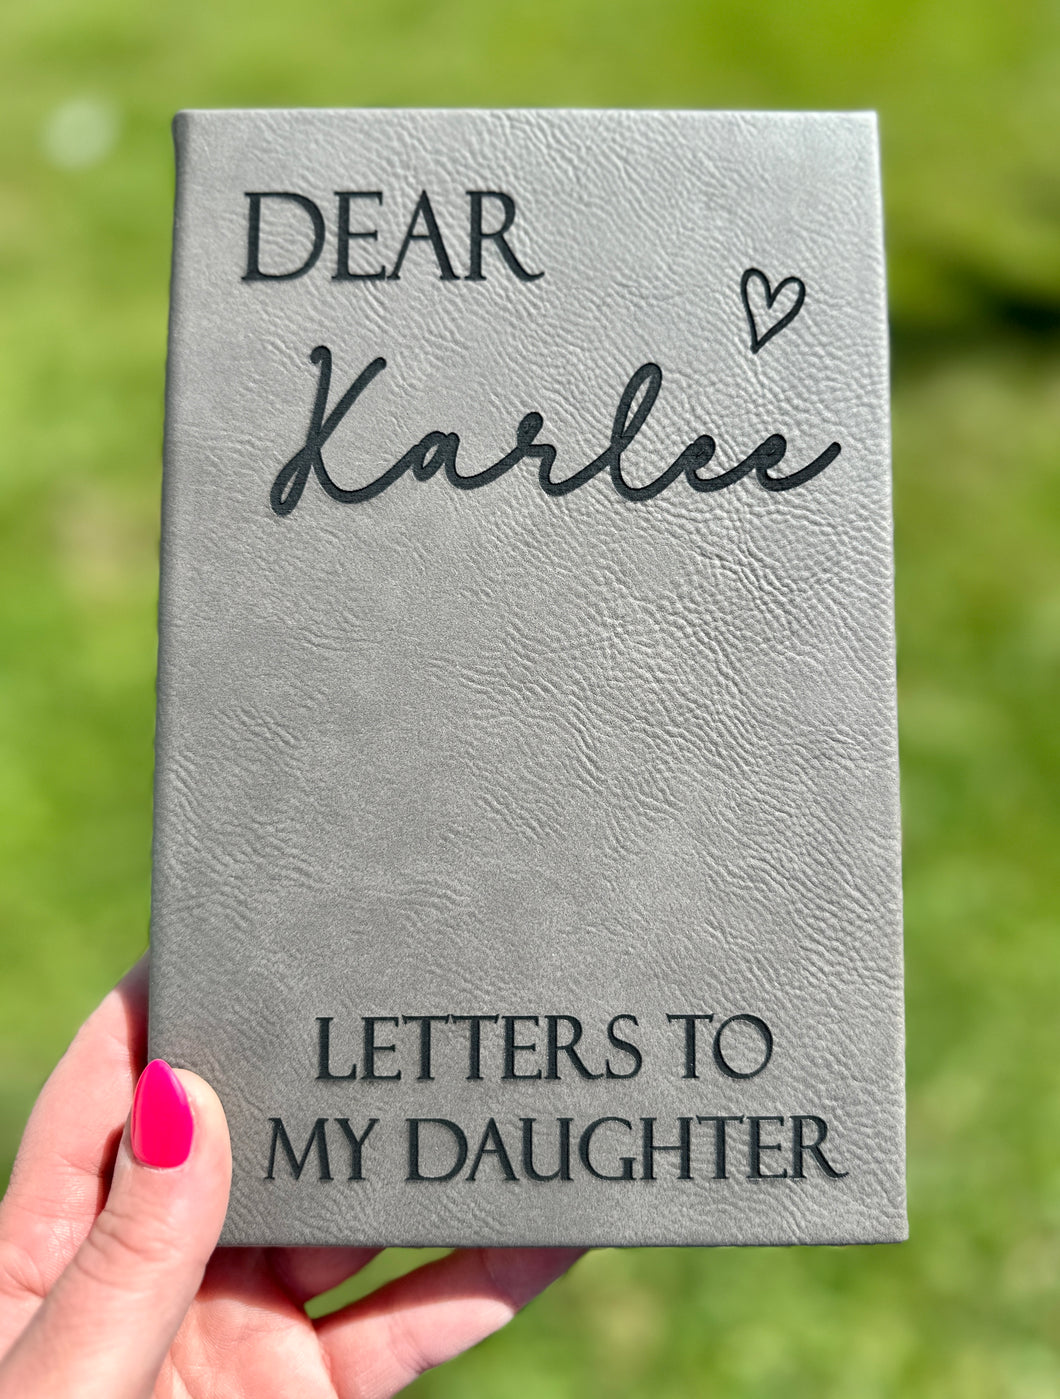 Letters to my daughter/son journal ♥️